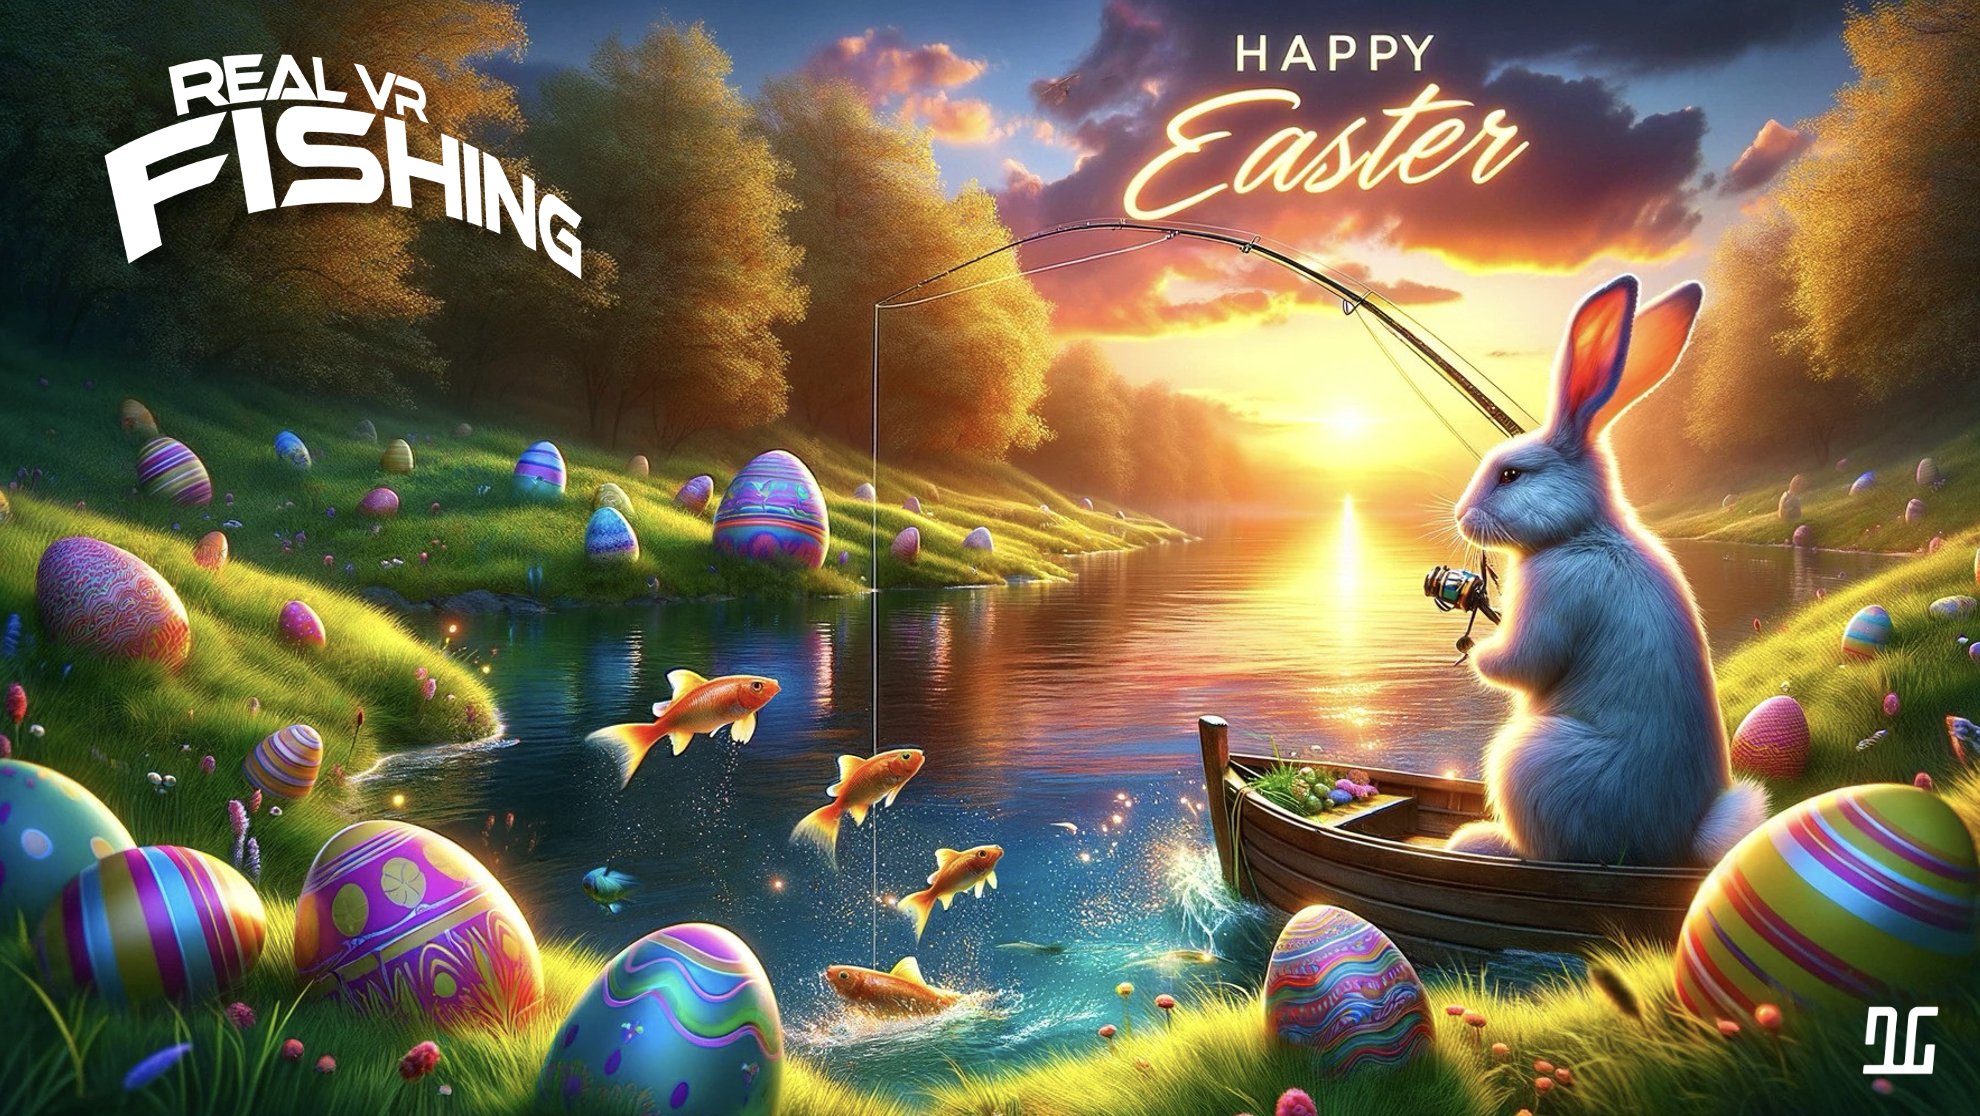 Real VR Fishing on X: HAPPY EASTER, ANGLERS!😍 Happy Easter to